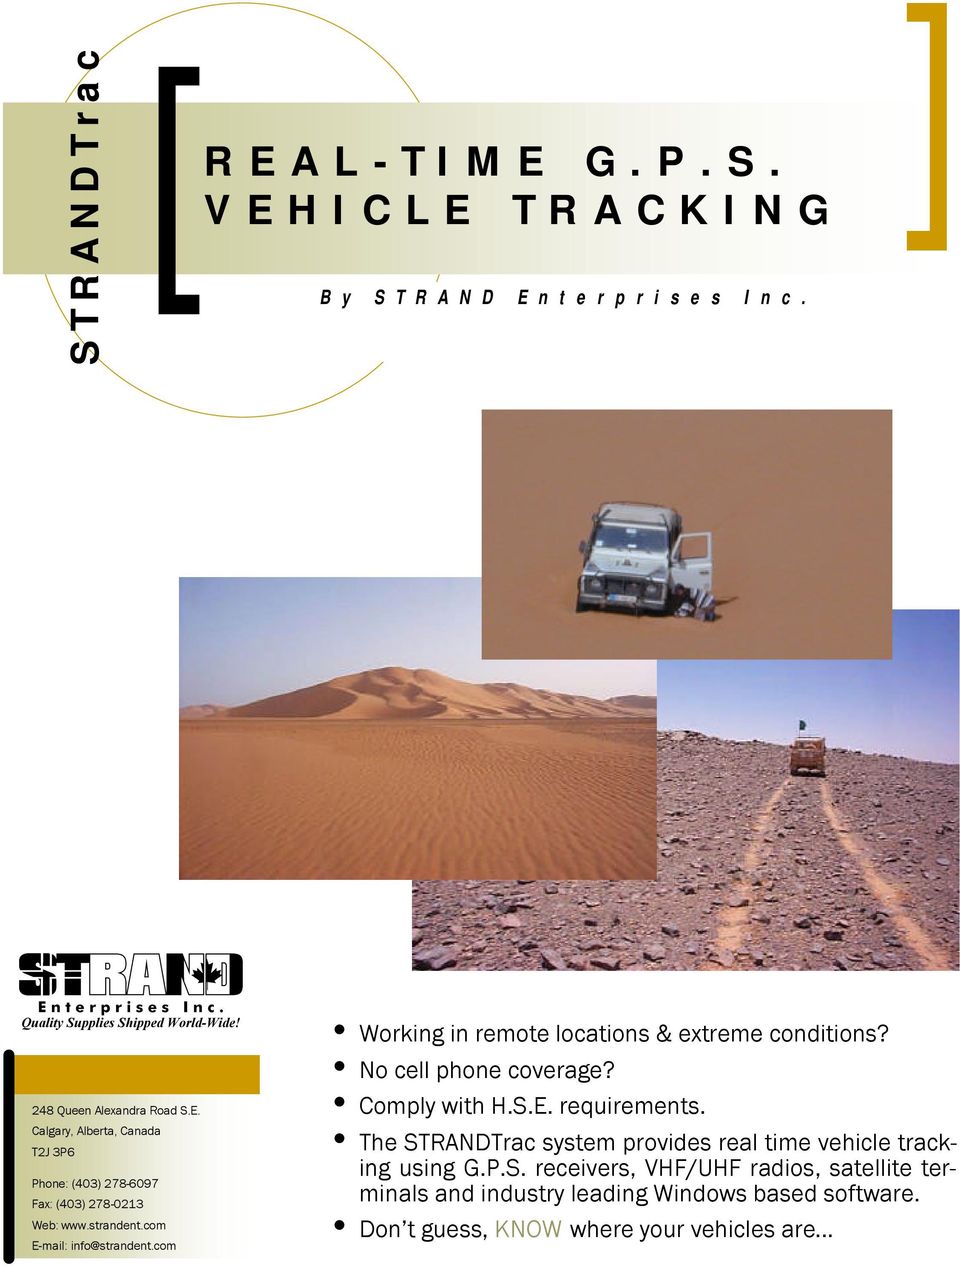 The STRANDTrac system provides real time vehicle tracking using G.P.S. receivers, VHF/UHF radios, satellite terminals and industry leading Windows based software.